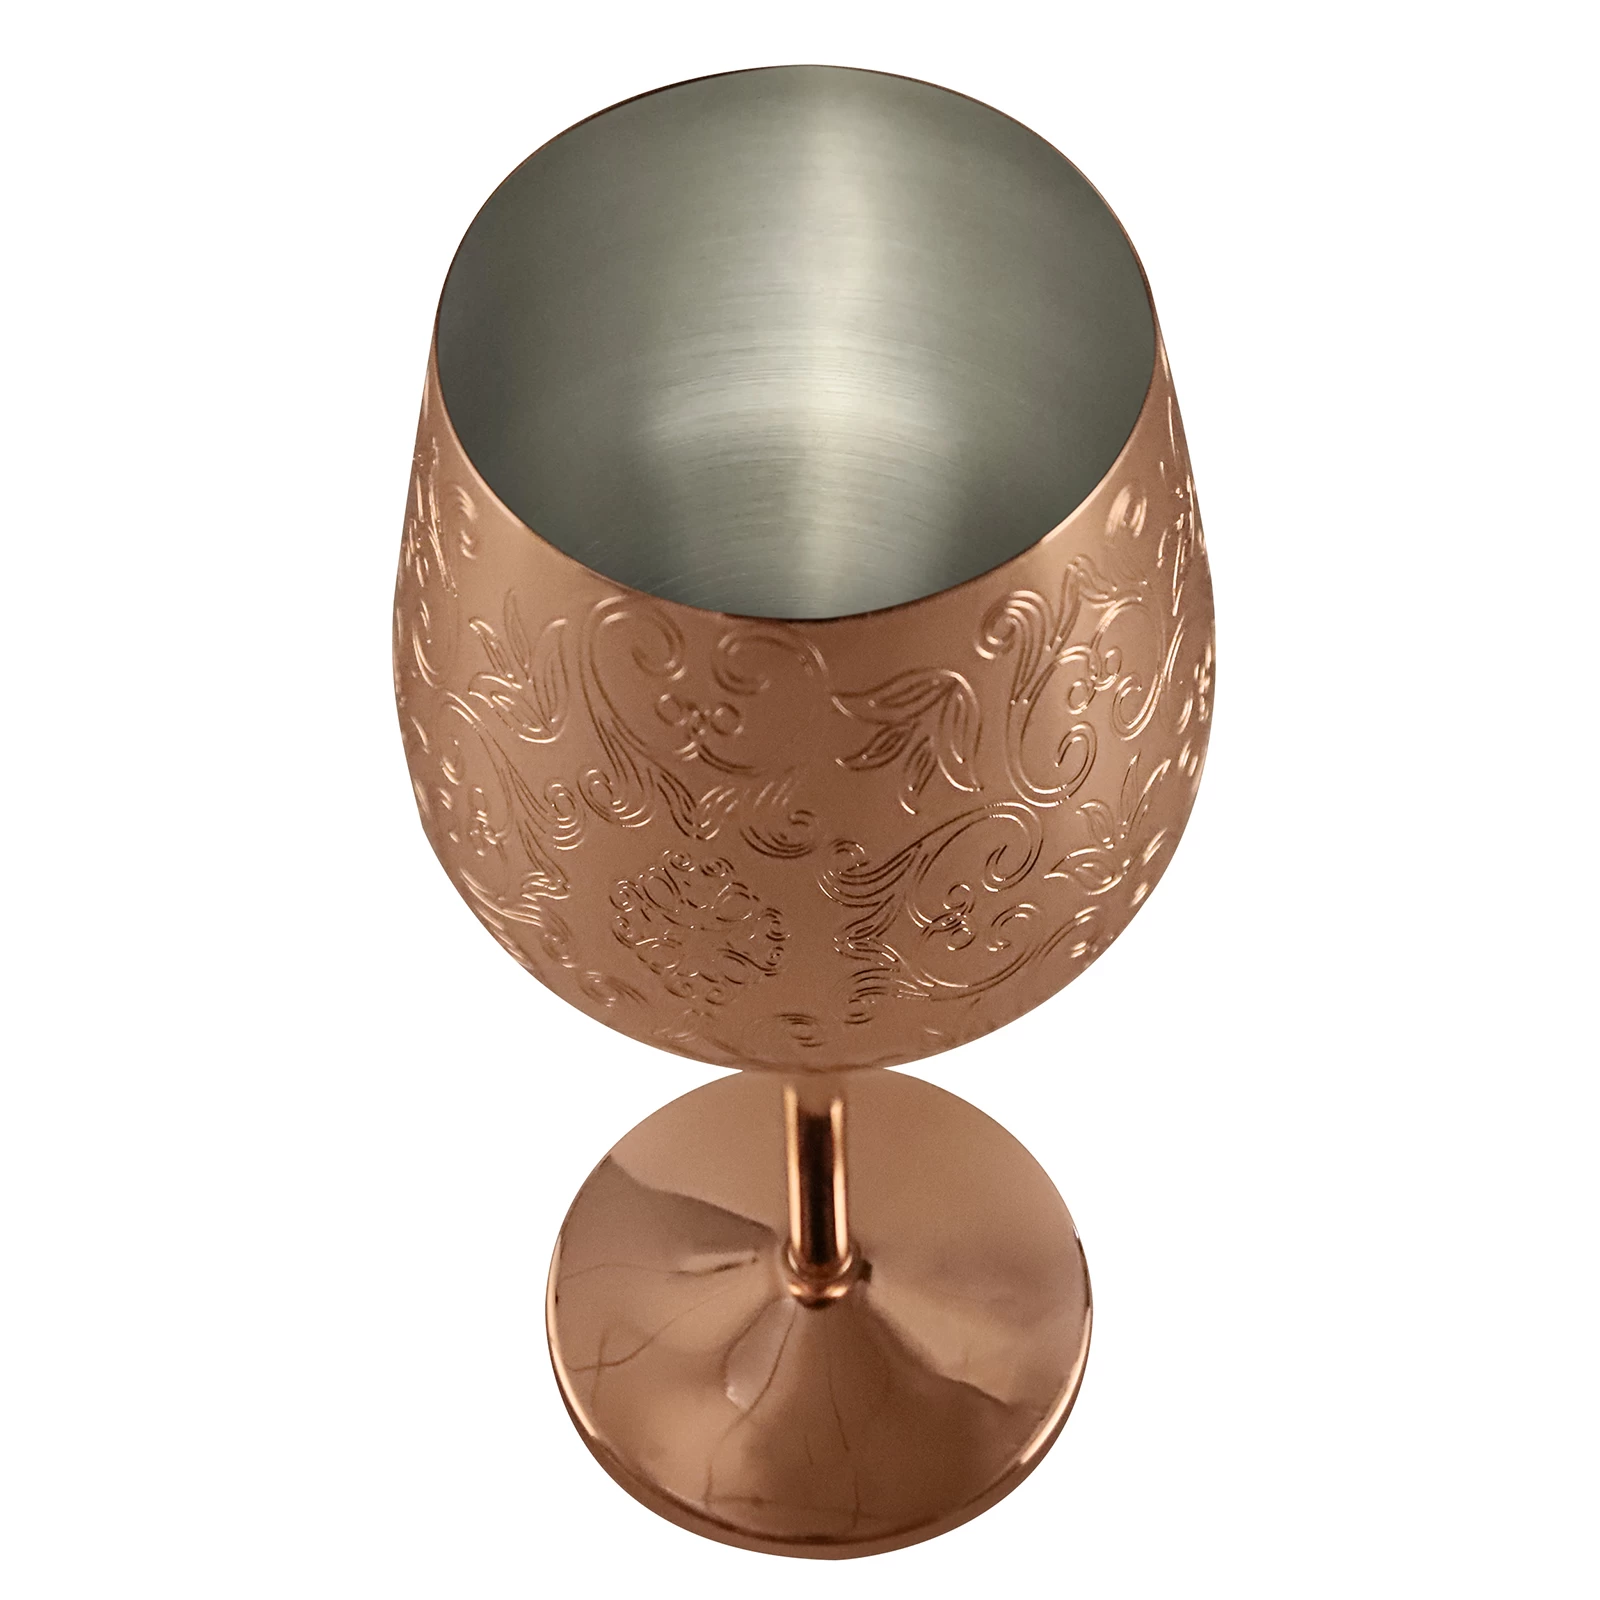 New Design Metal Drinking Glass Stainless Steel Wine Cup Egg Glass